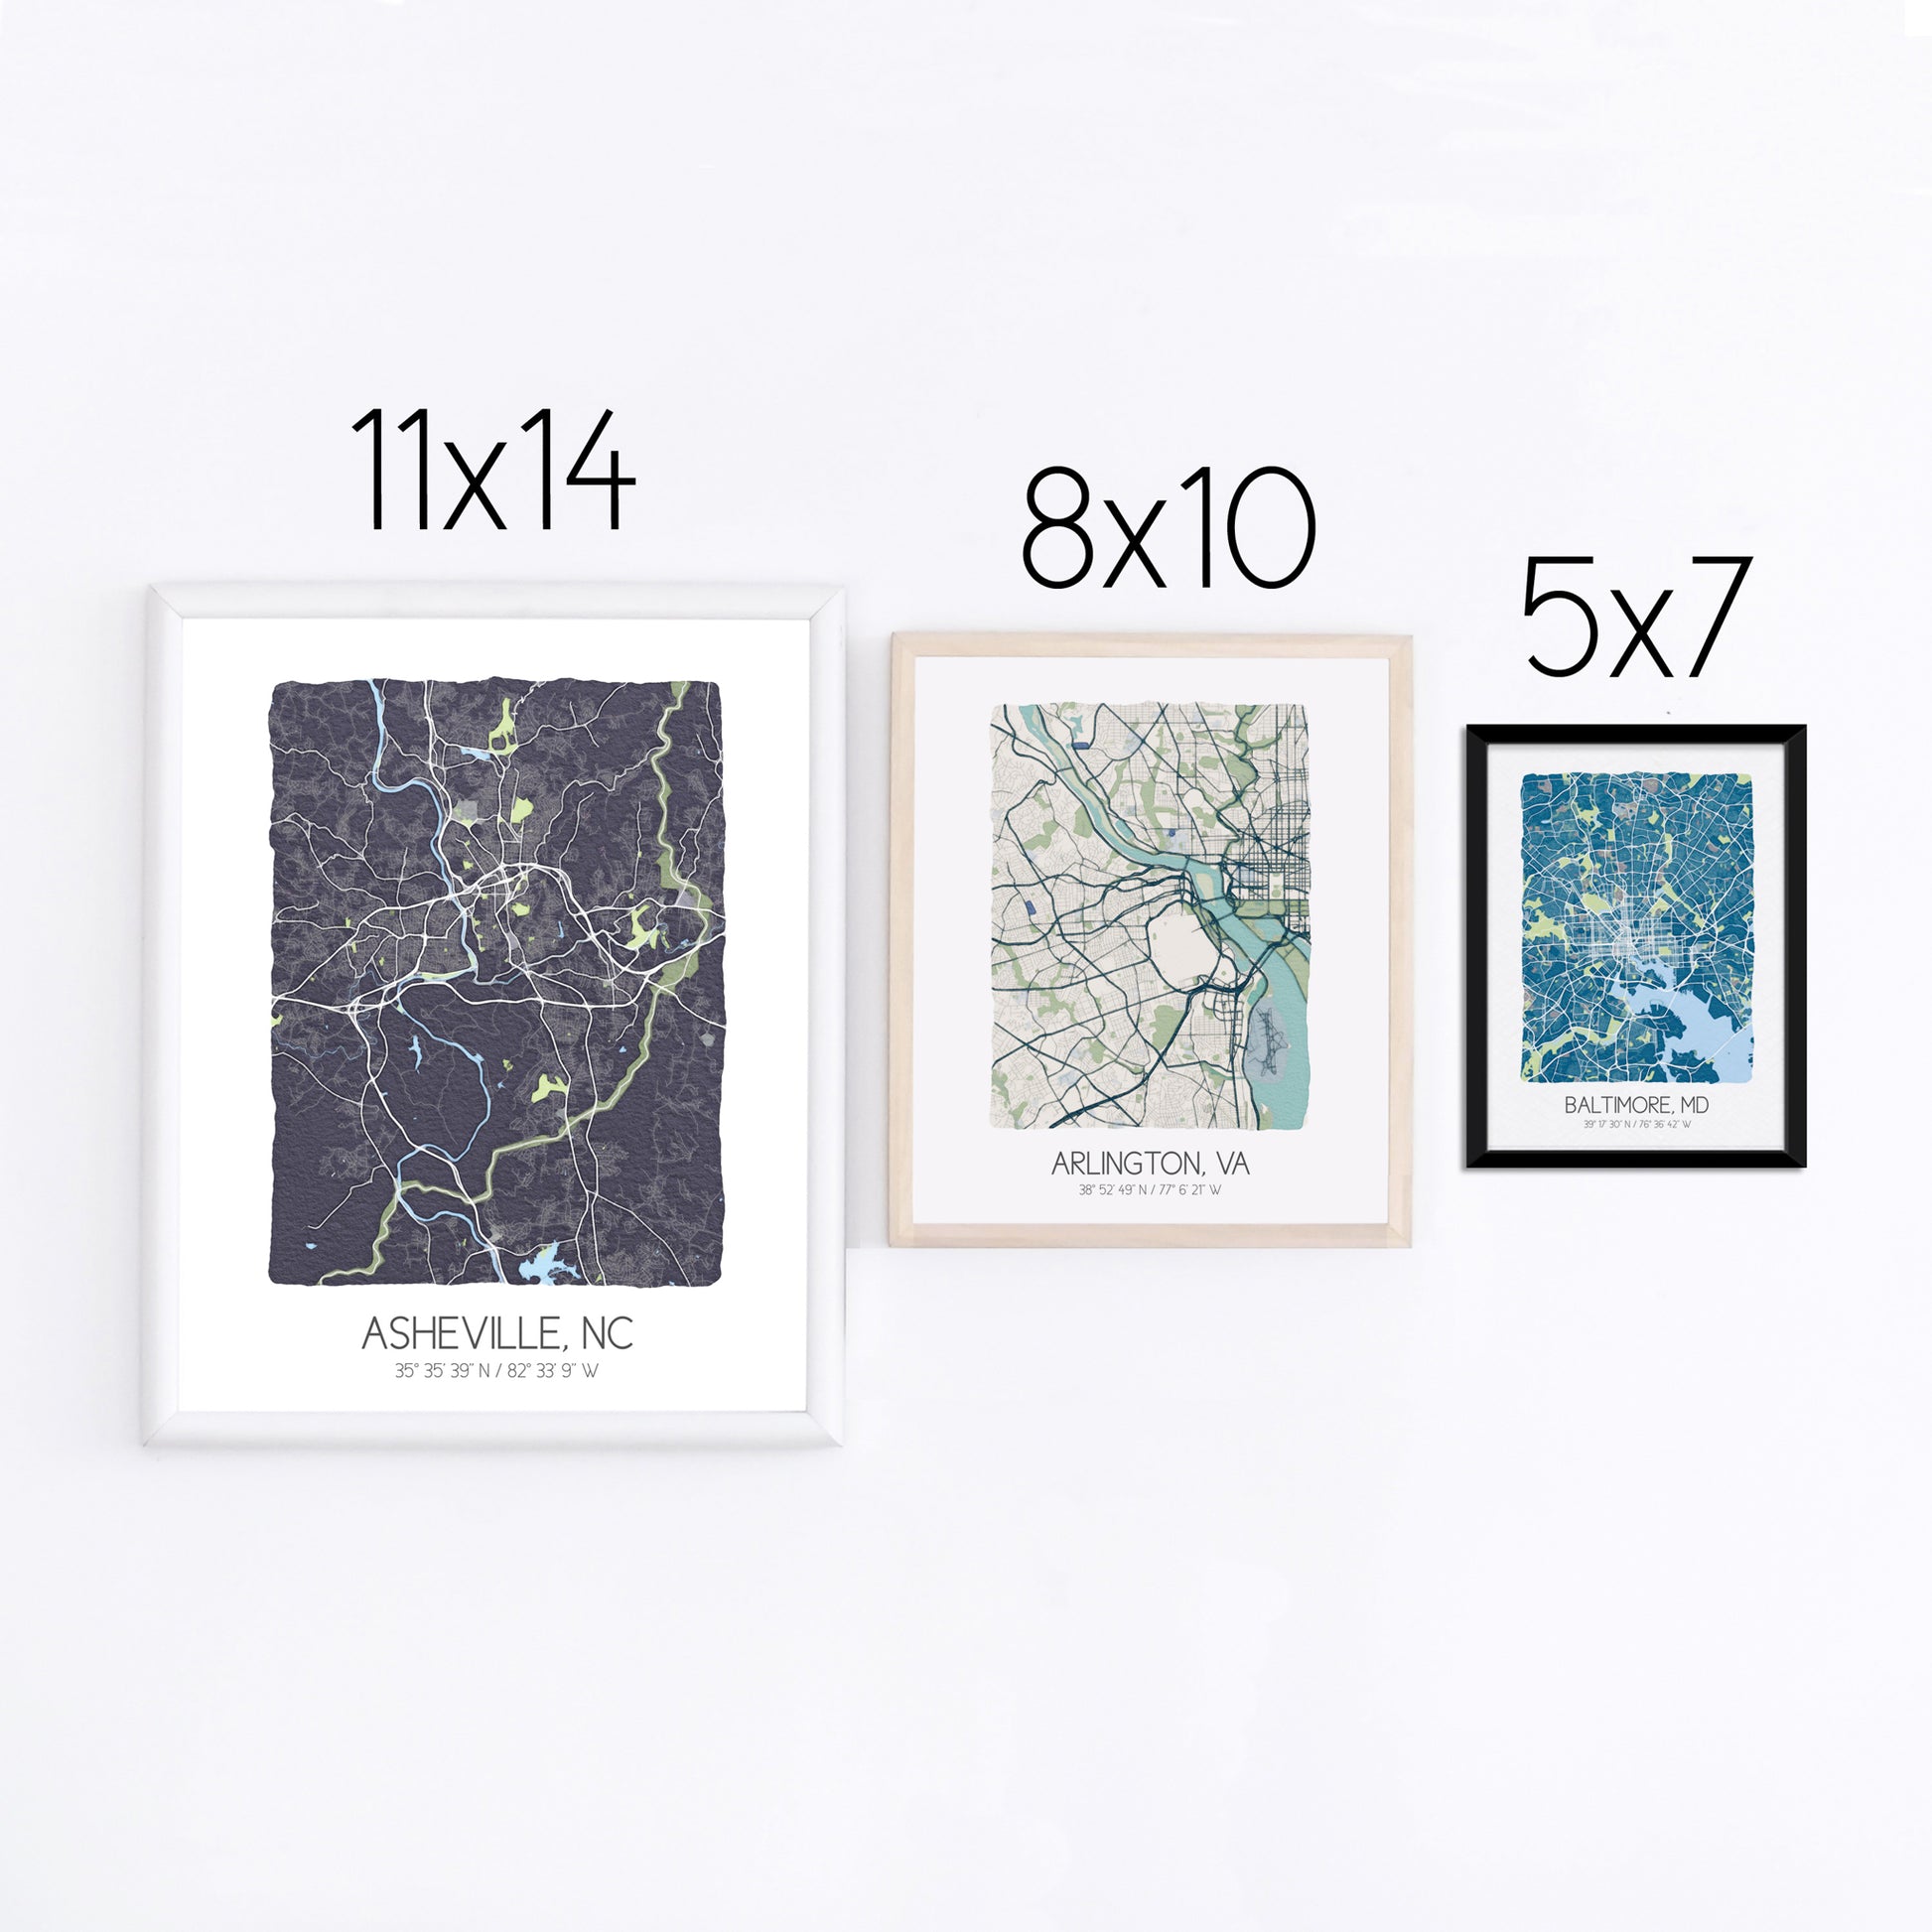 Three city map prints displayed on a wall in three different sizes - 11x14, 8x10, 5x7